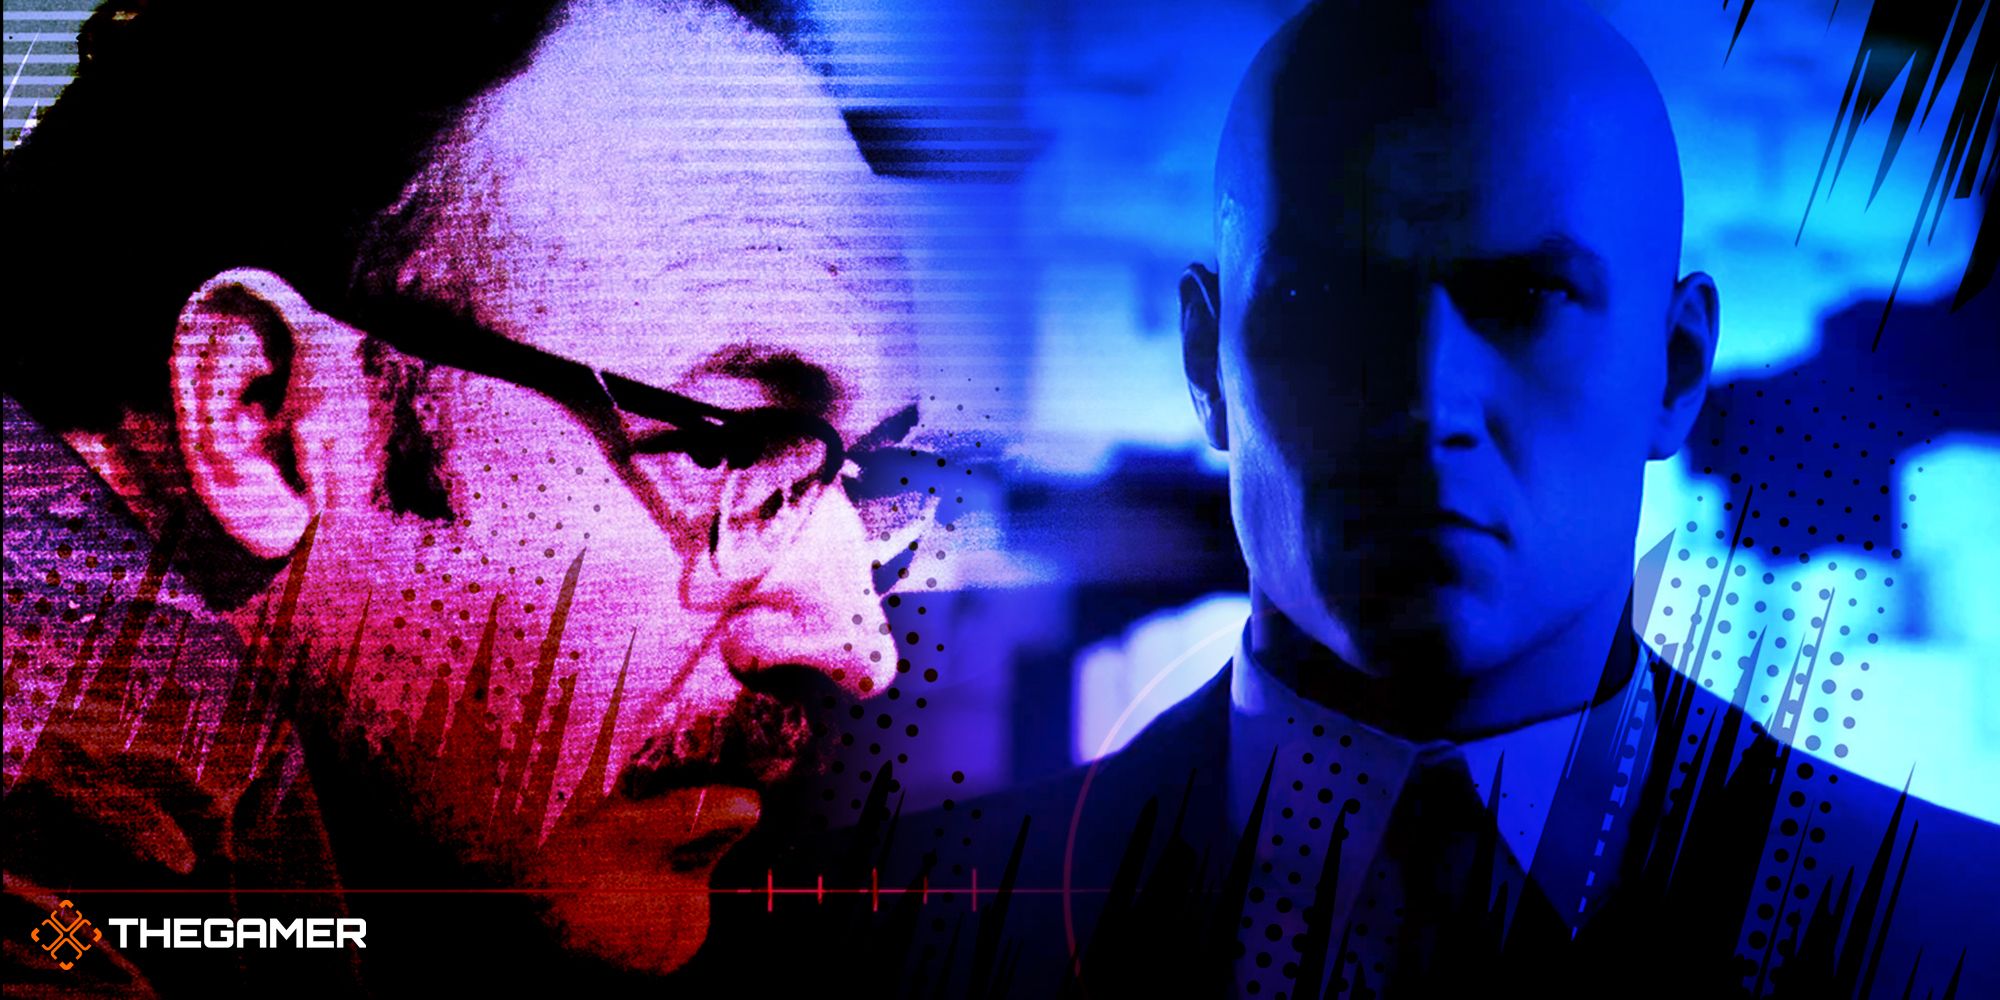 Gene Hackman in The Conversation in profile with purple coloring on the left, Agent 47 from the Hitman games with blue coloring on the right